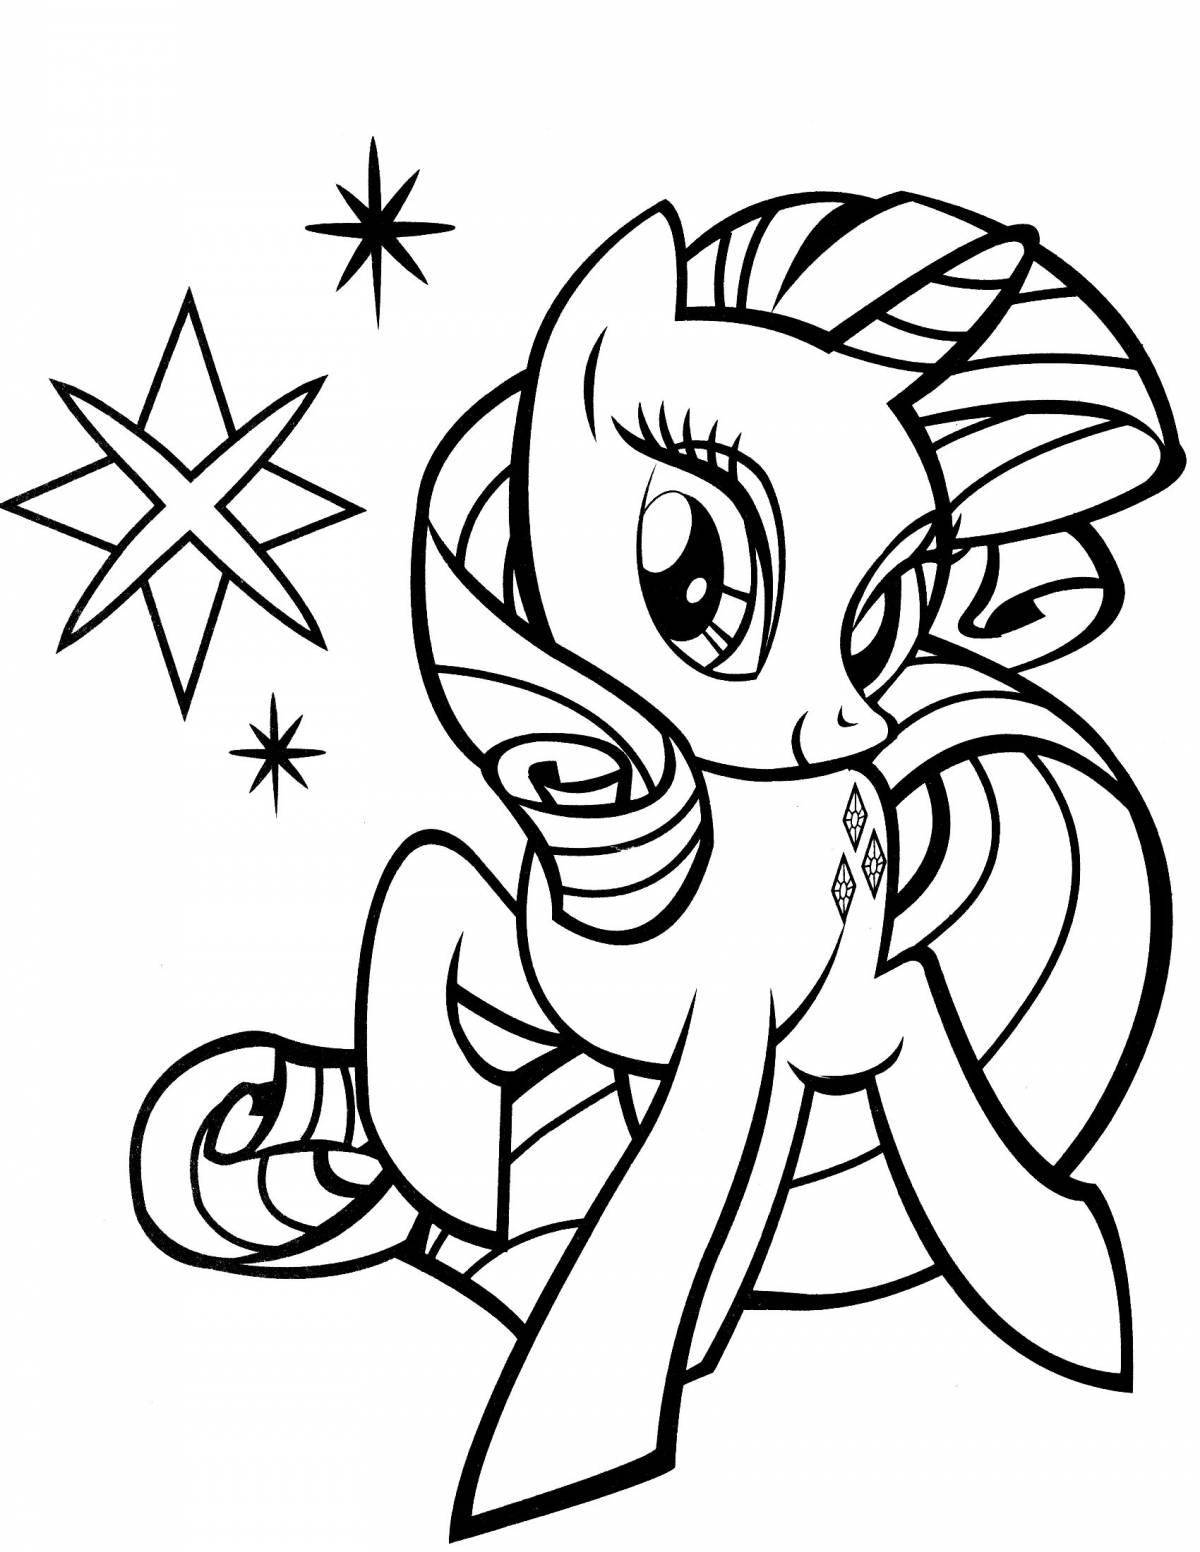 May little pony awesome coloring book